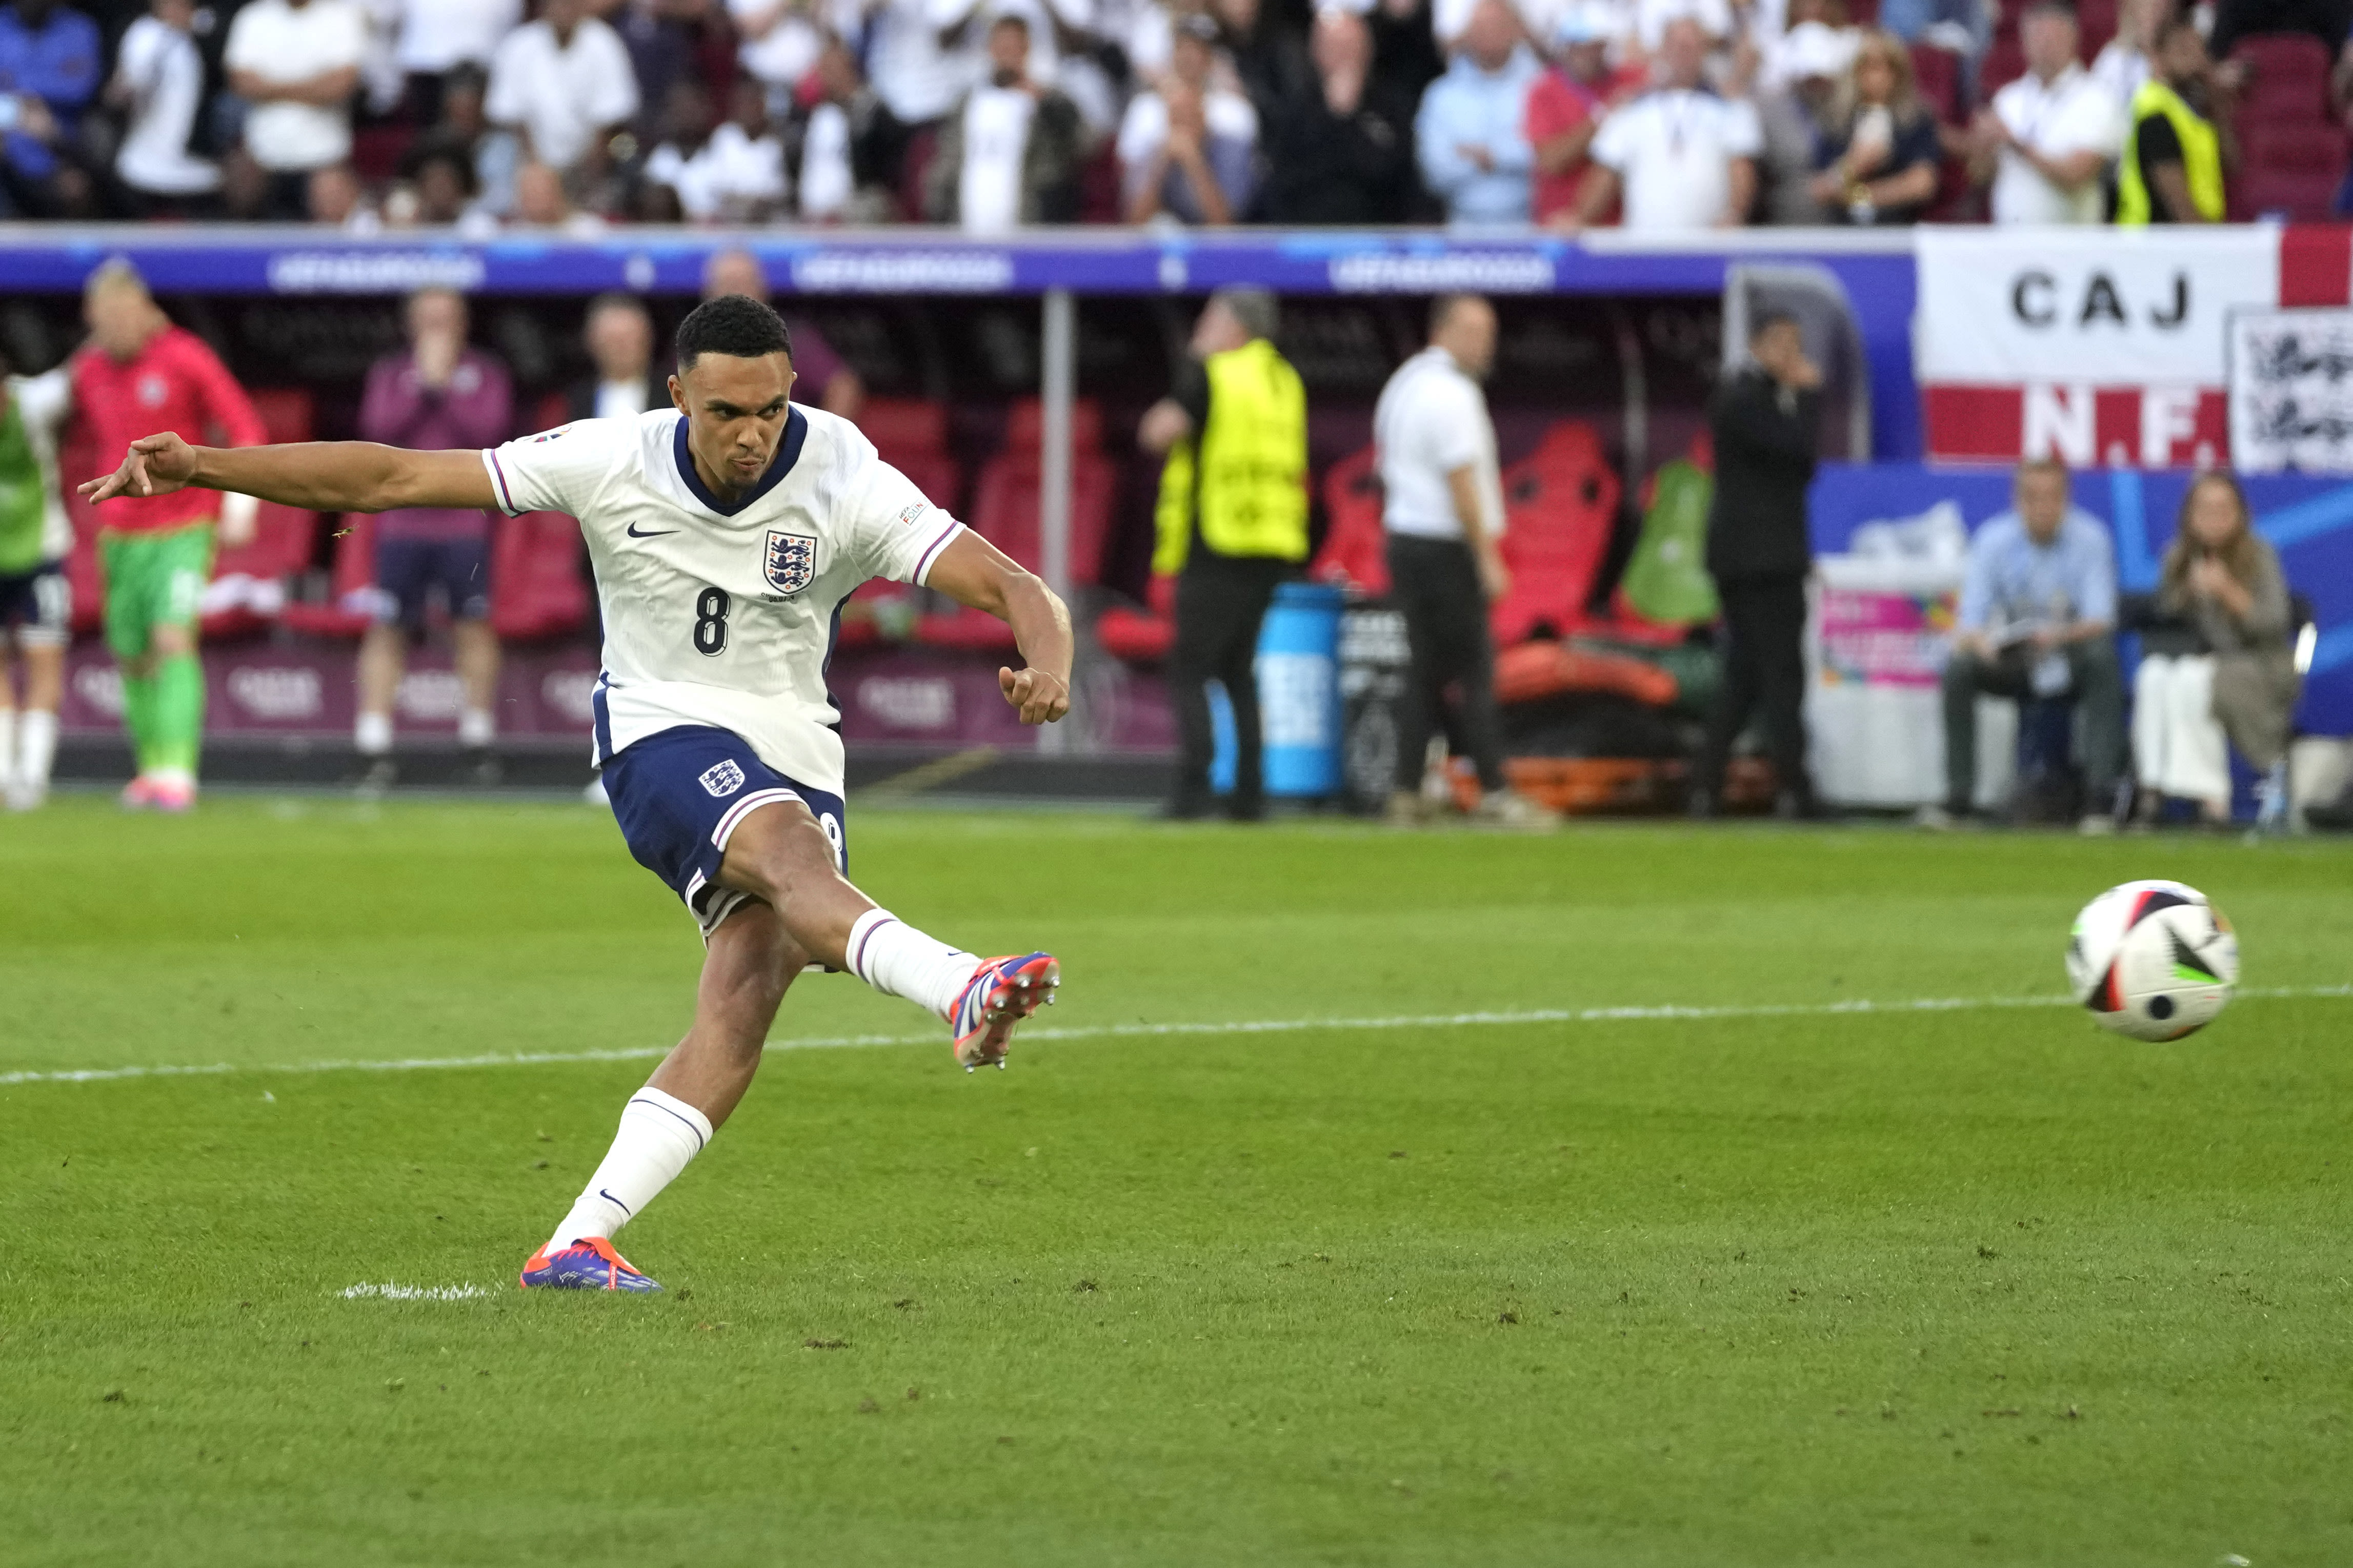 England's soccer team used to dread penalty shootouts. Here's why they've come to embrace them